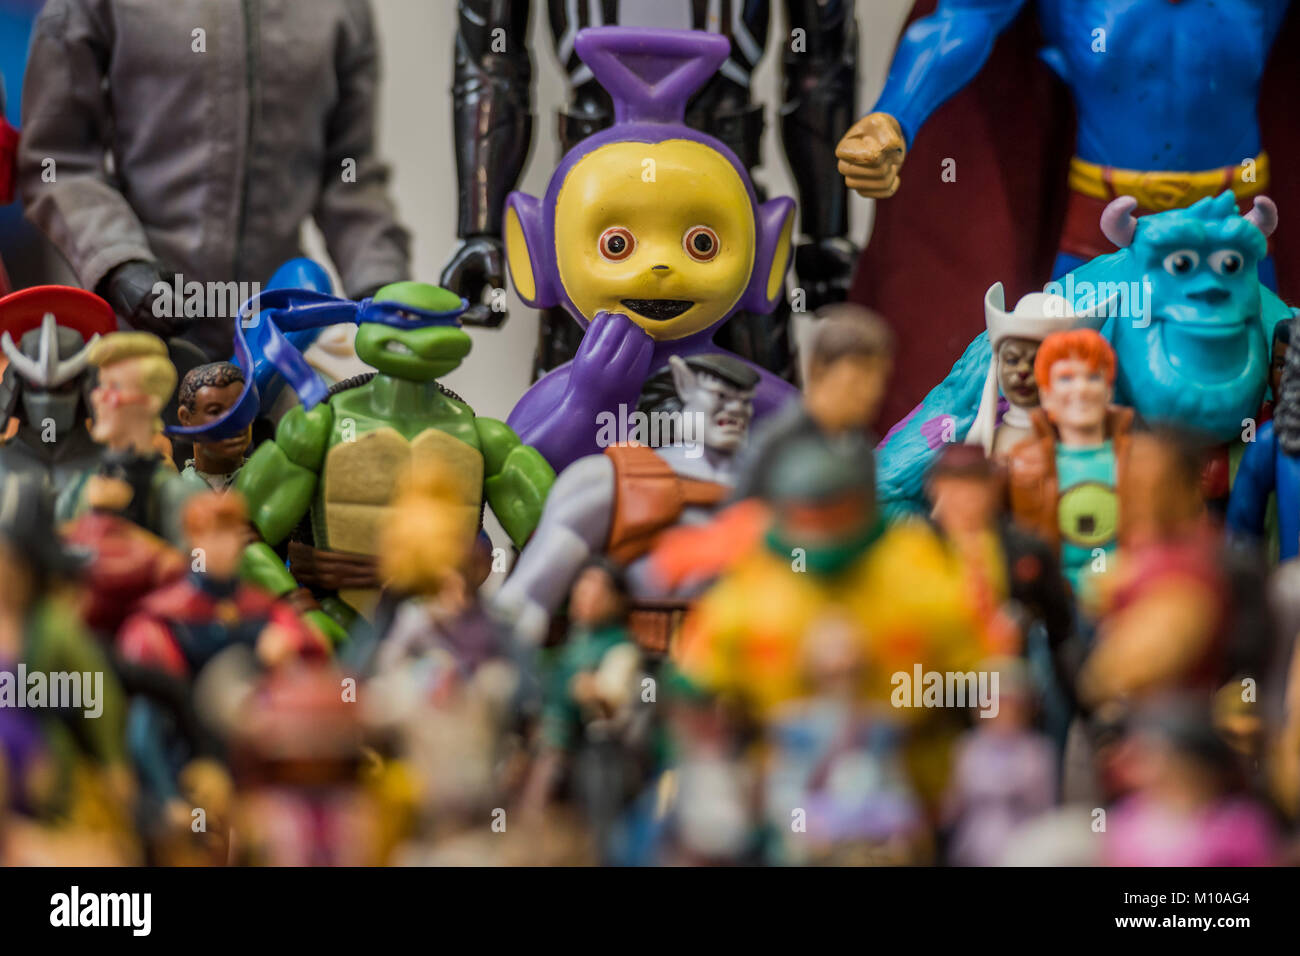 London, UK. 25th Jan, 2018. Toys, including a Tinky Winkie Teletubby, saved from landfill by The Toy Project Charity, which recycles unwanted toy to children who need them, including the Grenfell Tower nursery - The annual Toy Fair at Olympia, London. Credit: Guy Bell/Alamy Live News Stock Photo